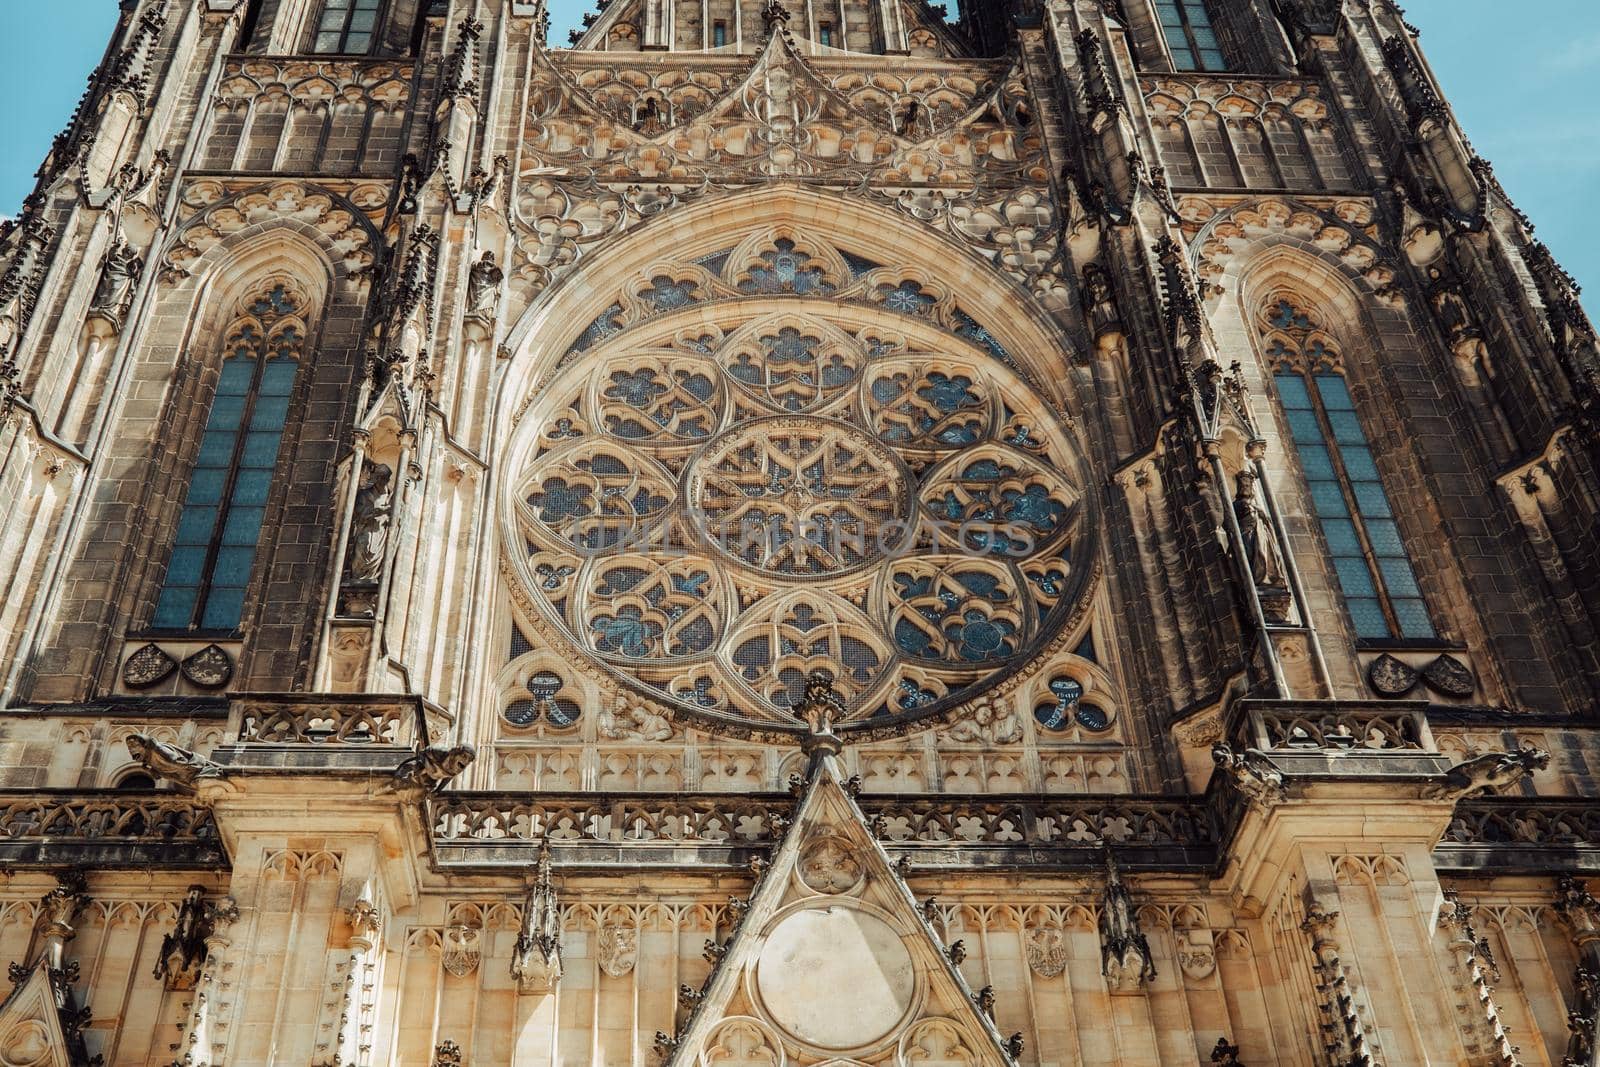 Exterior facade of St. Vitus cathedral in Prague Czech Republic. Architecture in gothic style, details of masterpiece religious building. by kristina_kokhanova